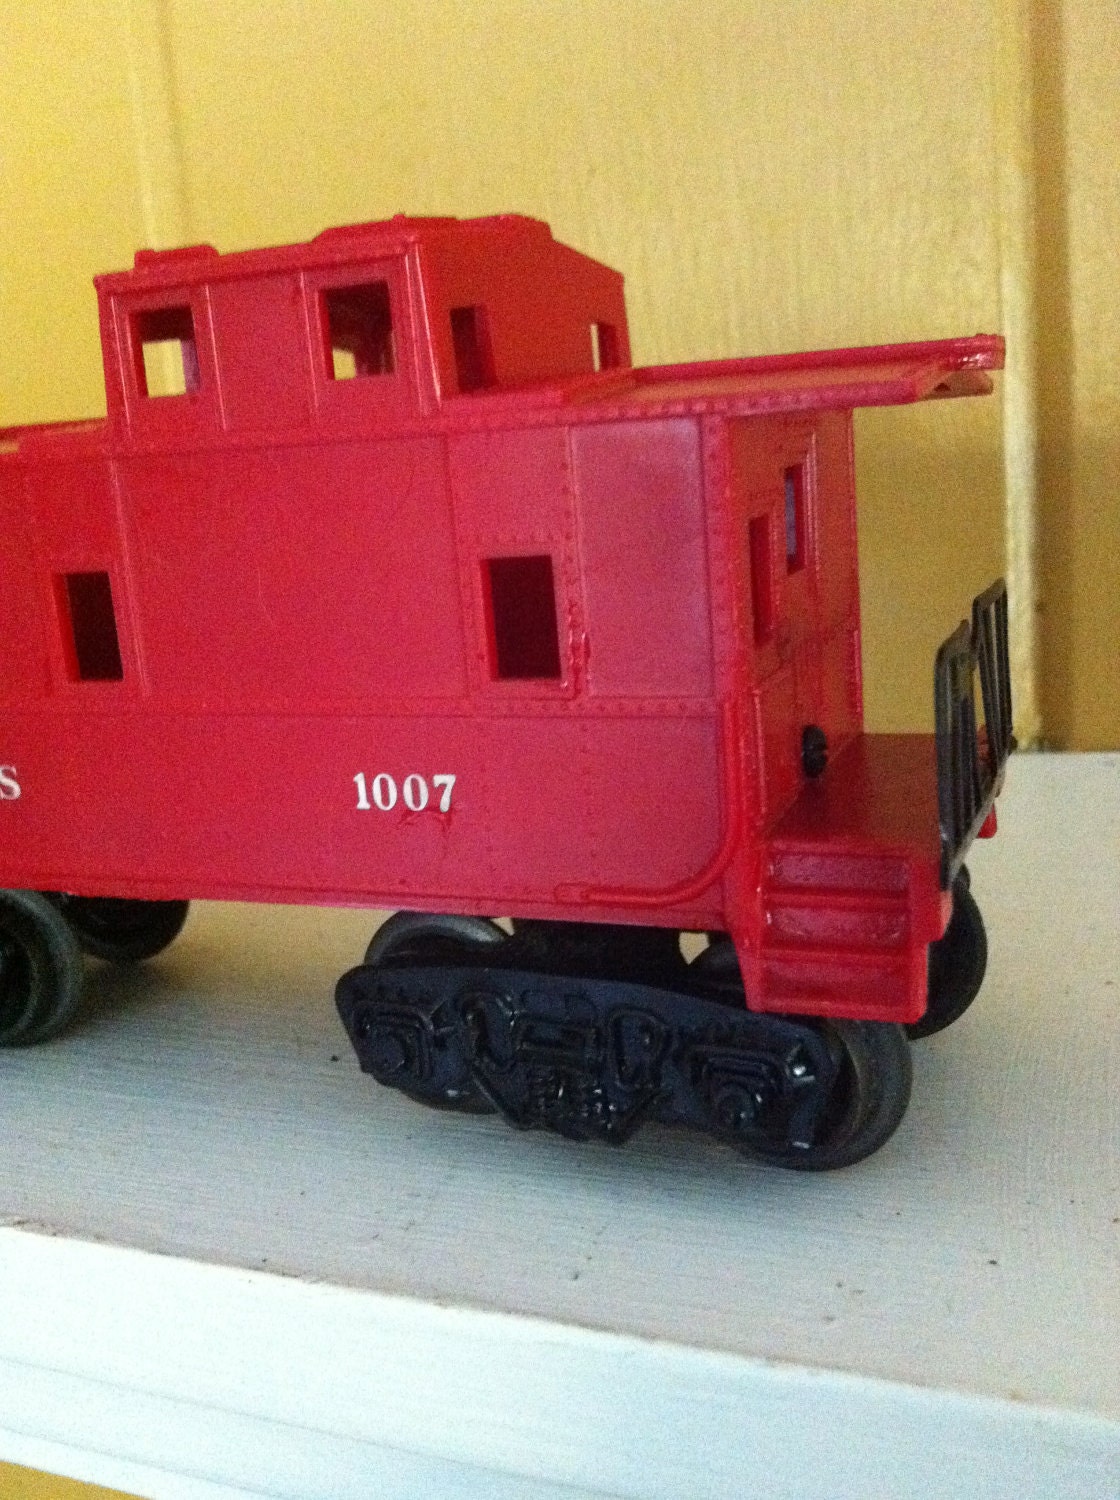 Lionel Toy Train Cars ...Vintage...All Three ..Red Caboose..Black Car and Blue Car....